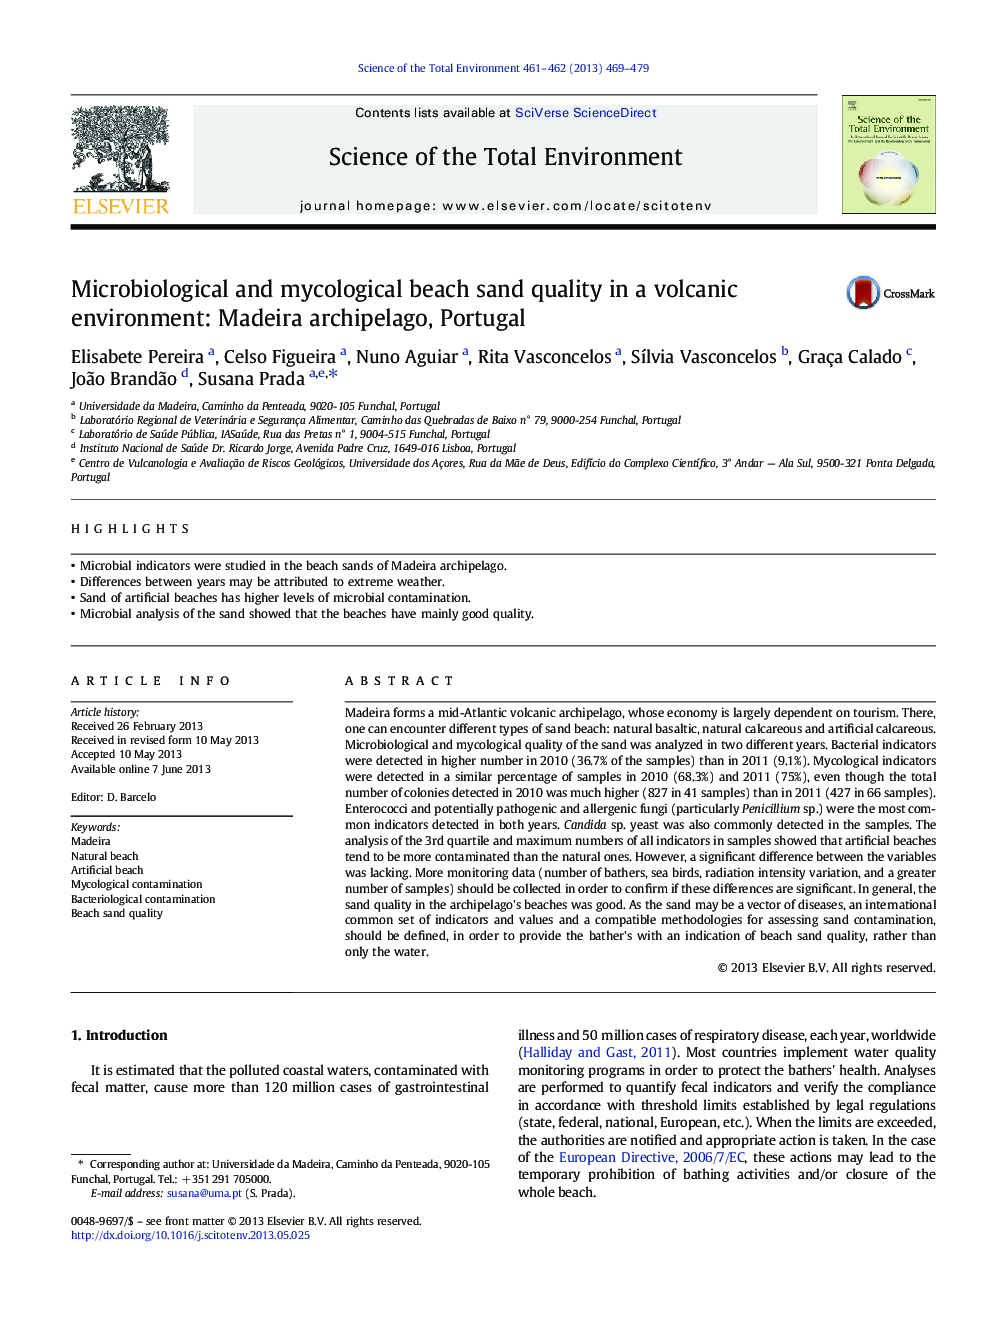 Microbiological and mycological beach sand quality in a volcanic environment: Madeira archipelago, Portugal